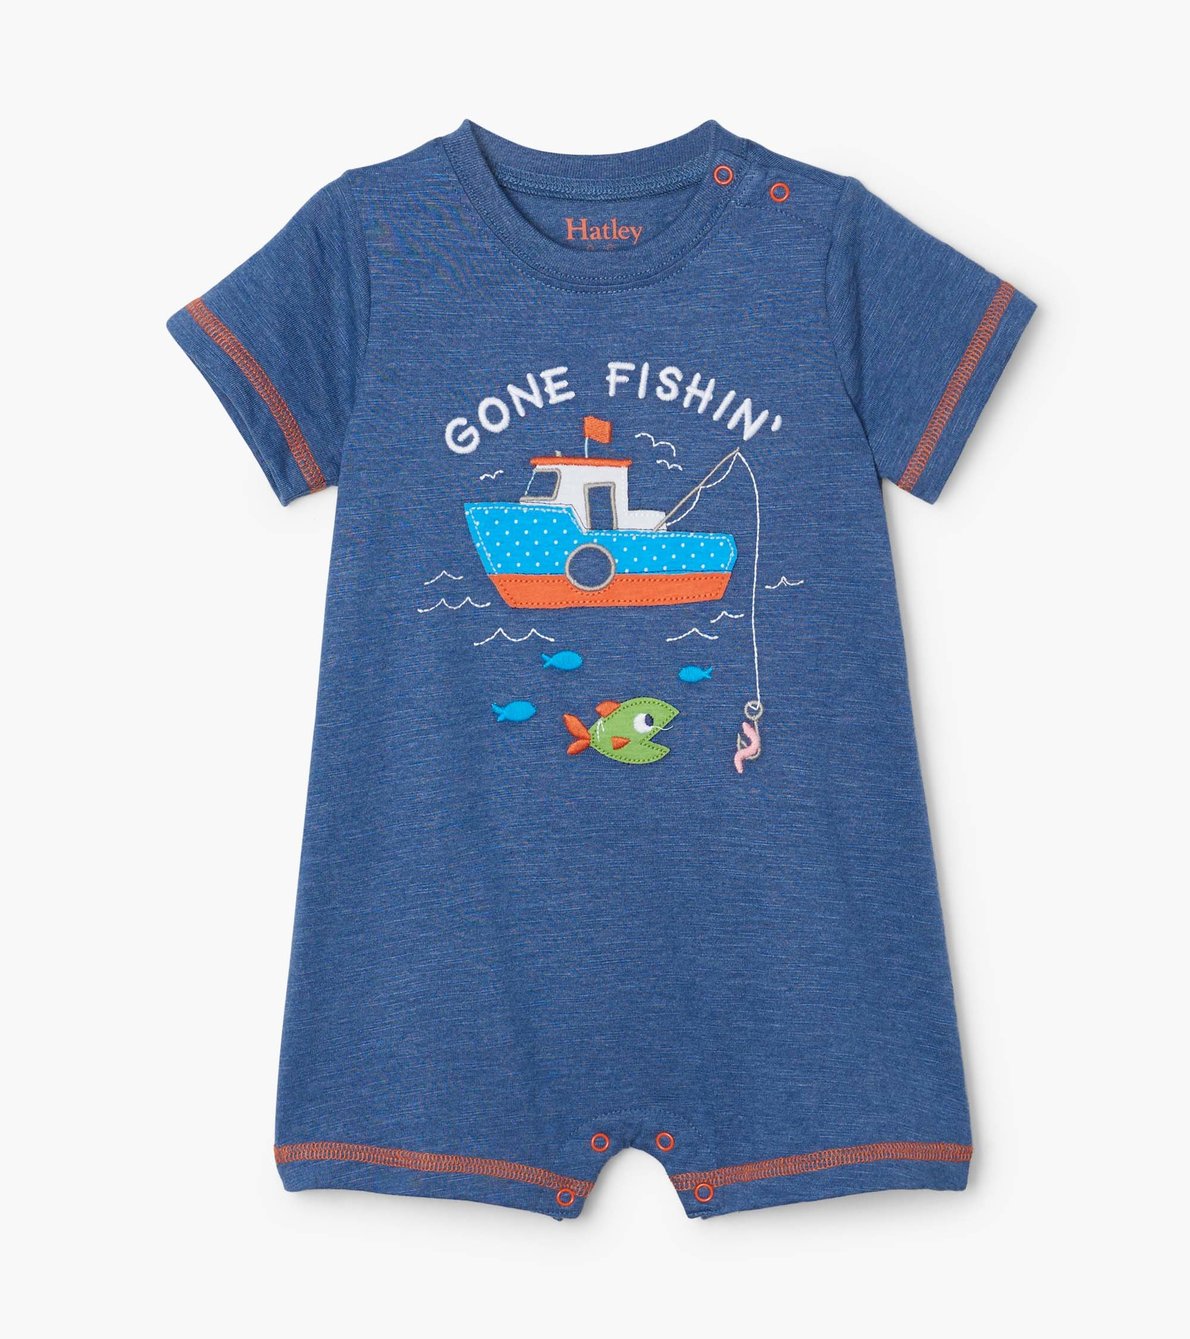 View larger image of Gone Fishin' Baby Romper